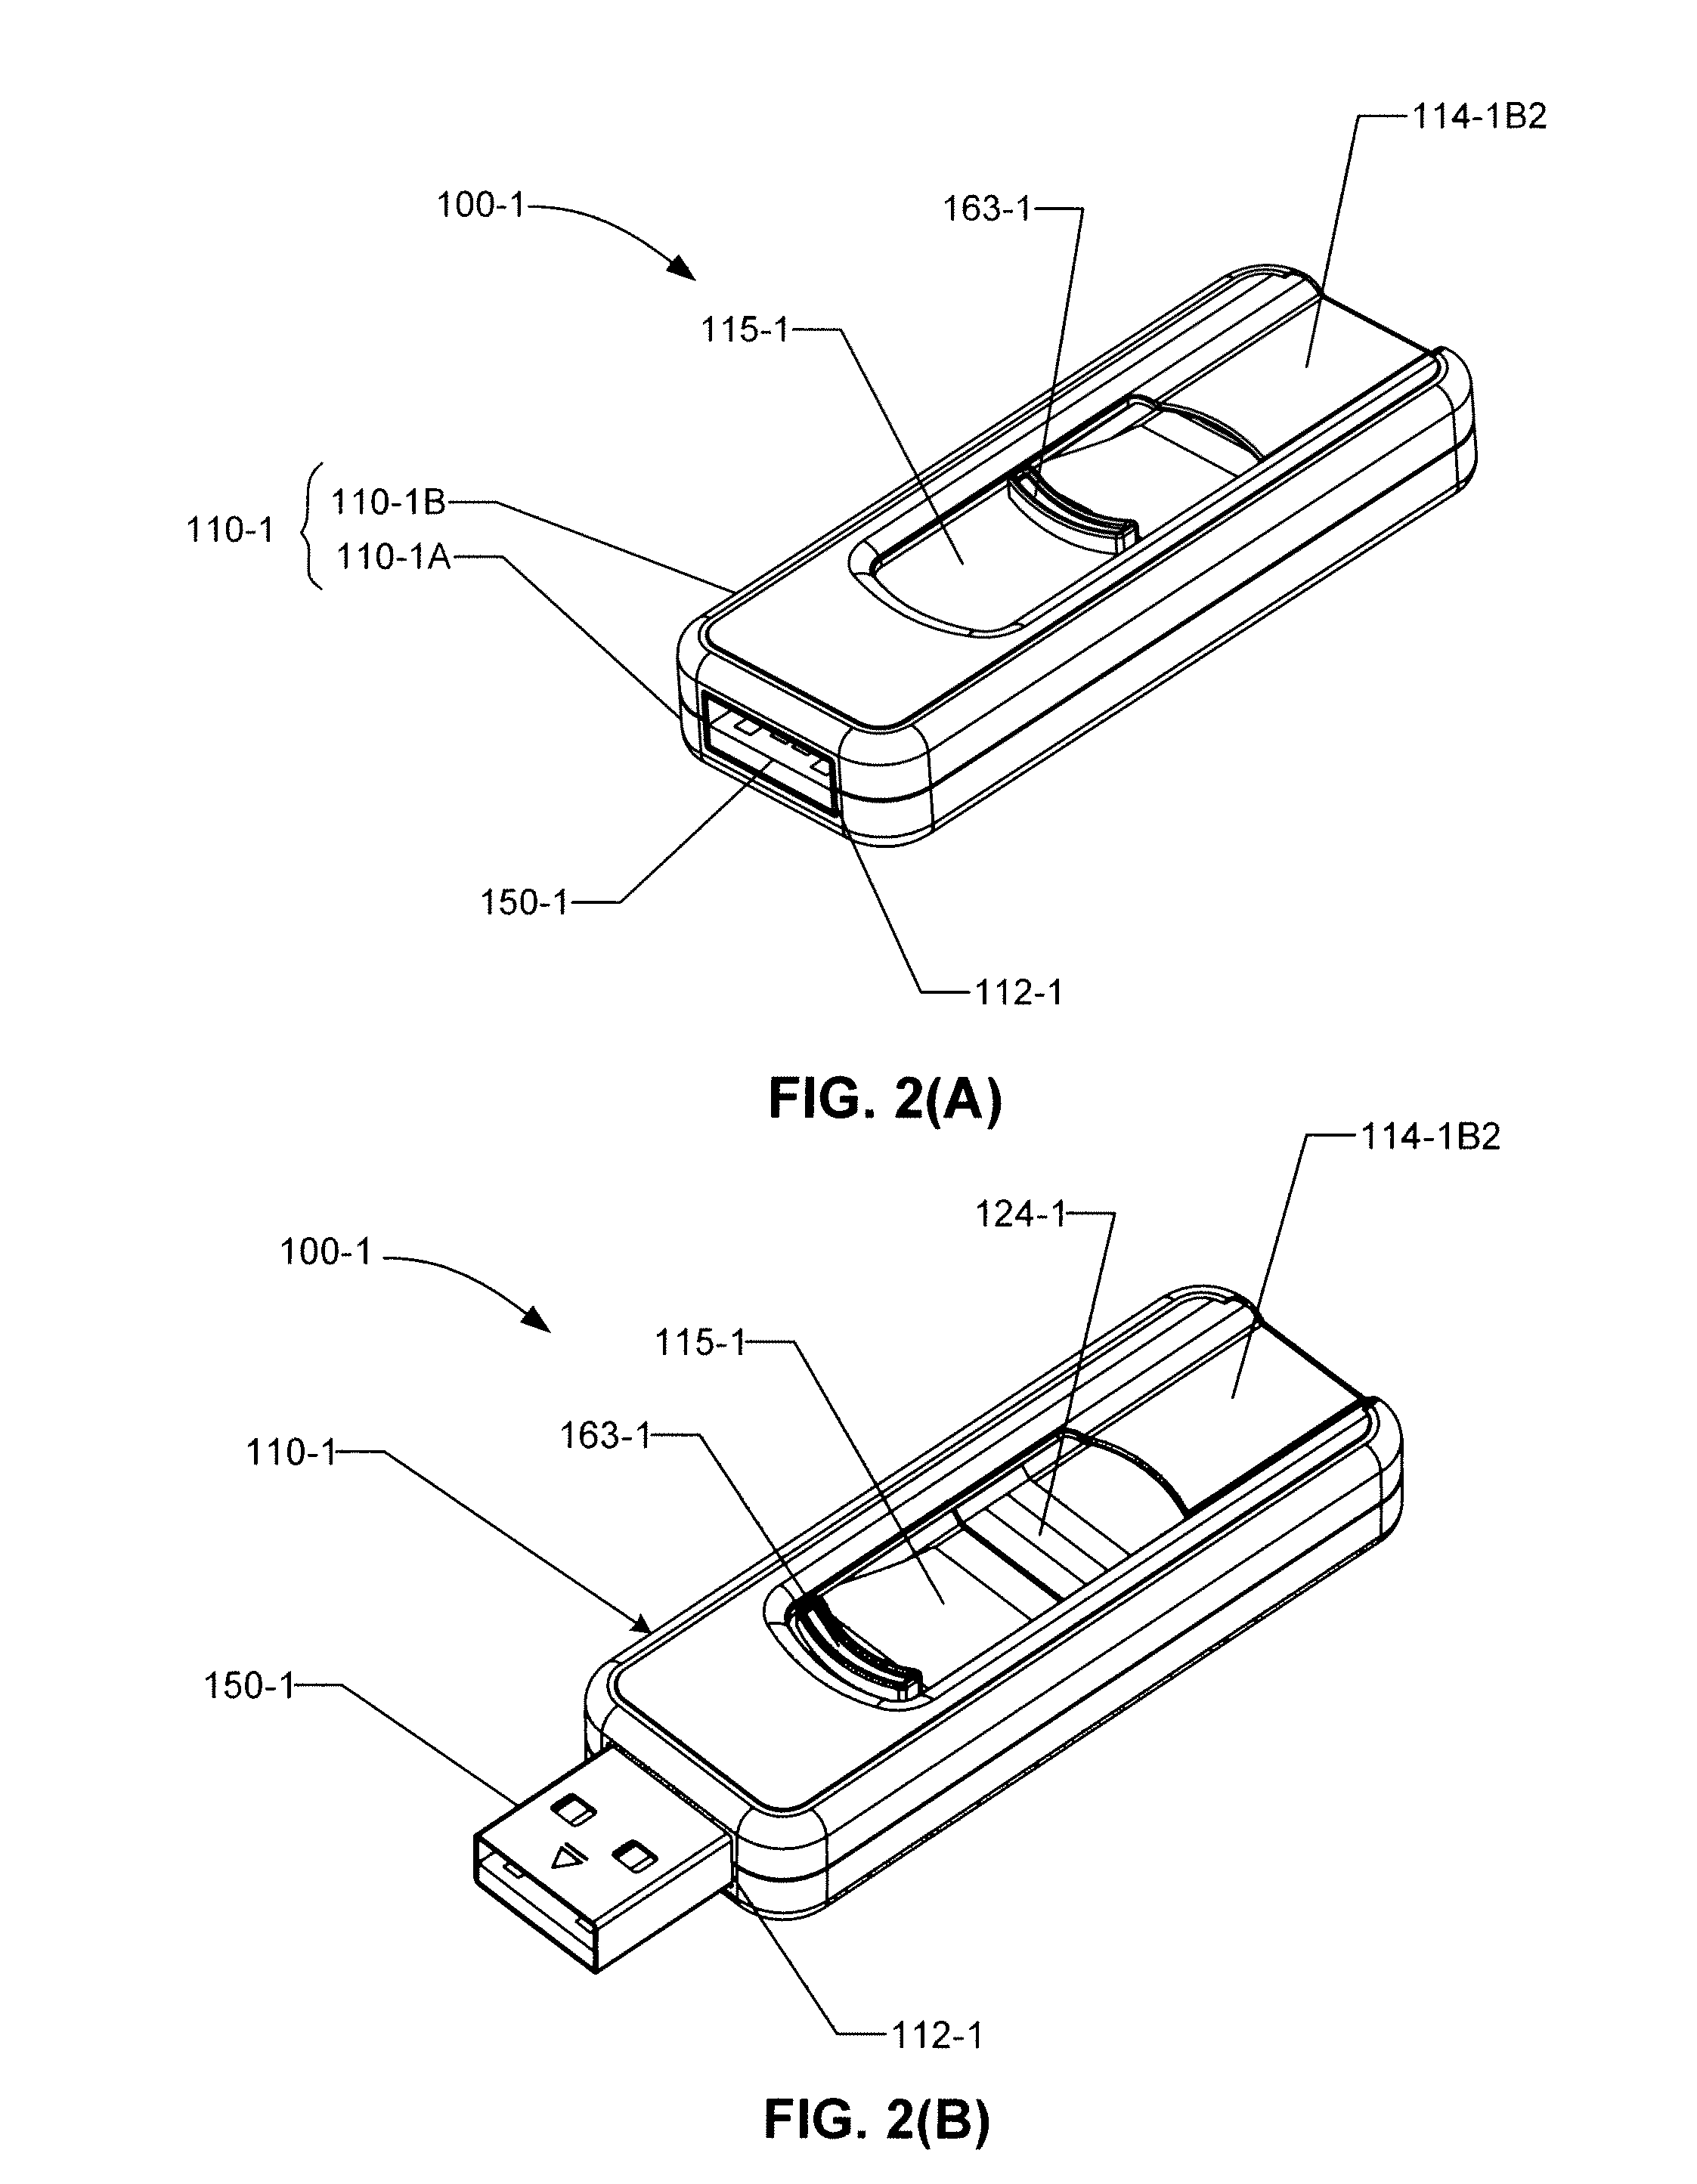 Press/Push USB Flash Drive With Deploying And Retracting Functionalities With Elasticity Material And Fingerprint Verification Capability